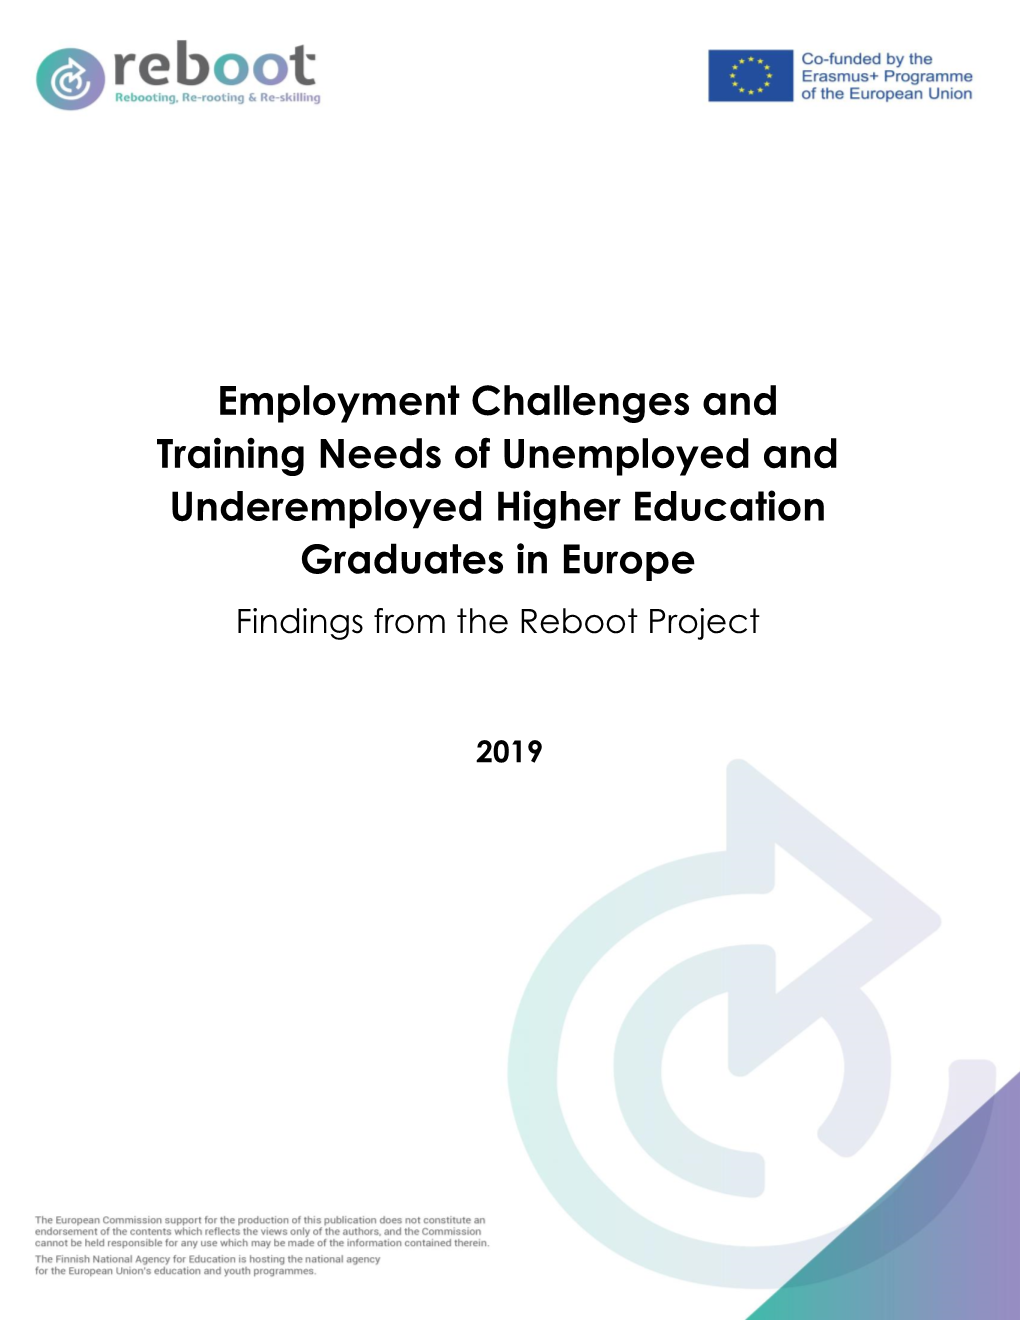 Employment Challenges and Training Needs of Unemployed and Underemployed Higher Education Graduates in Europe Findings from the Reboot Project